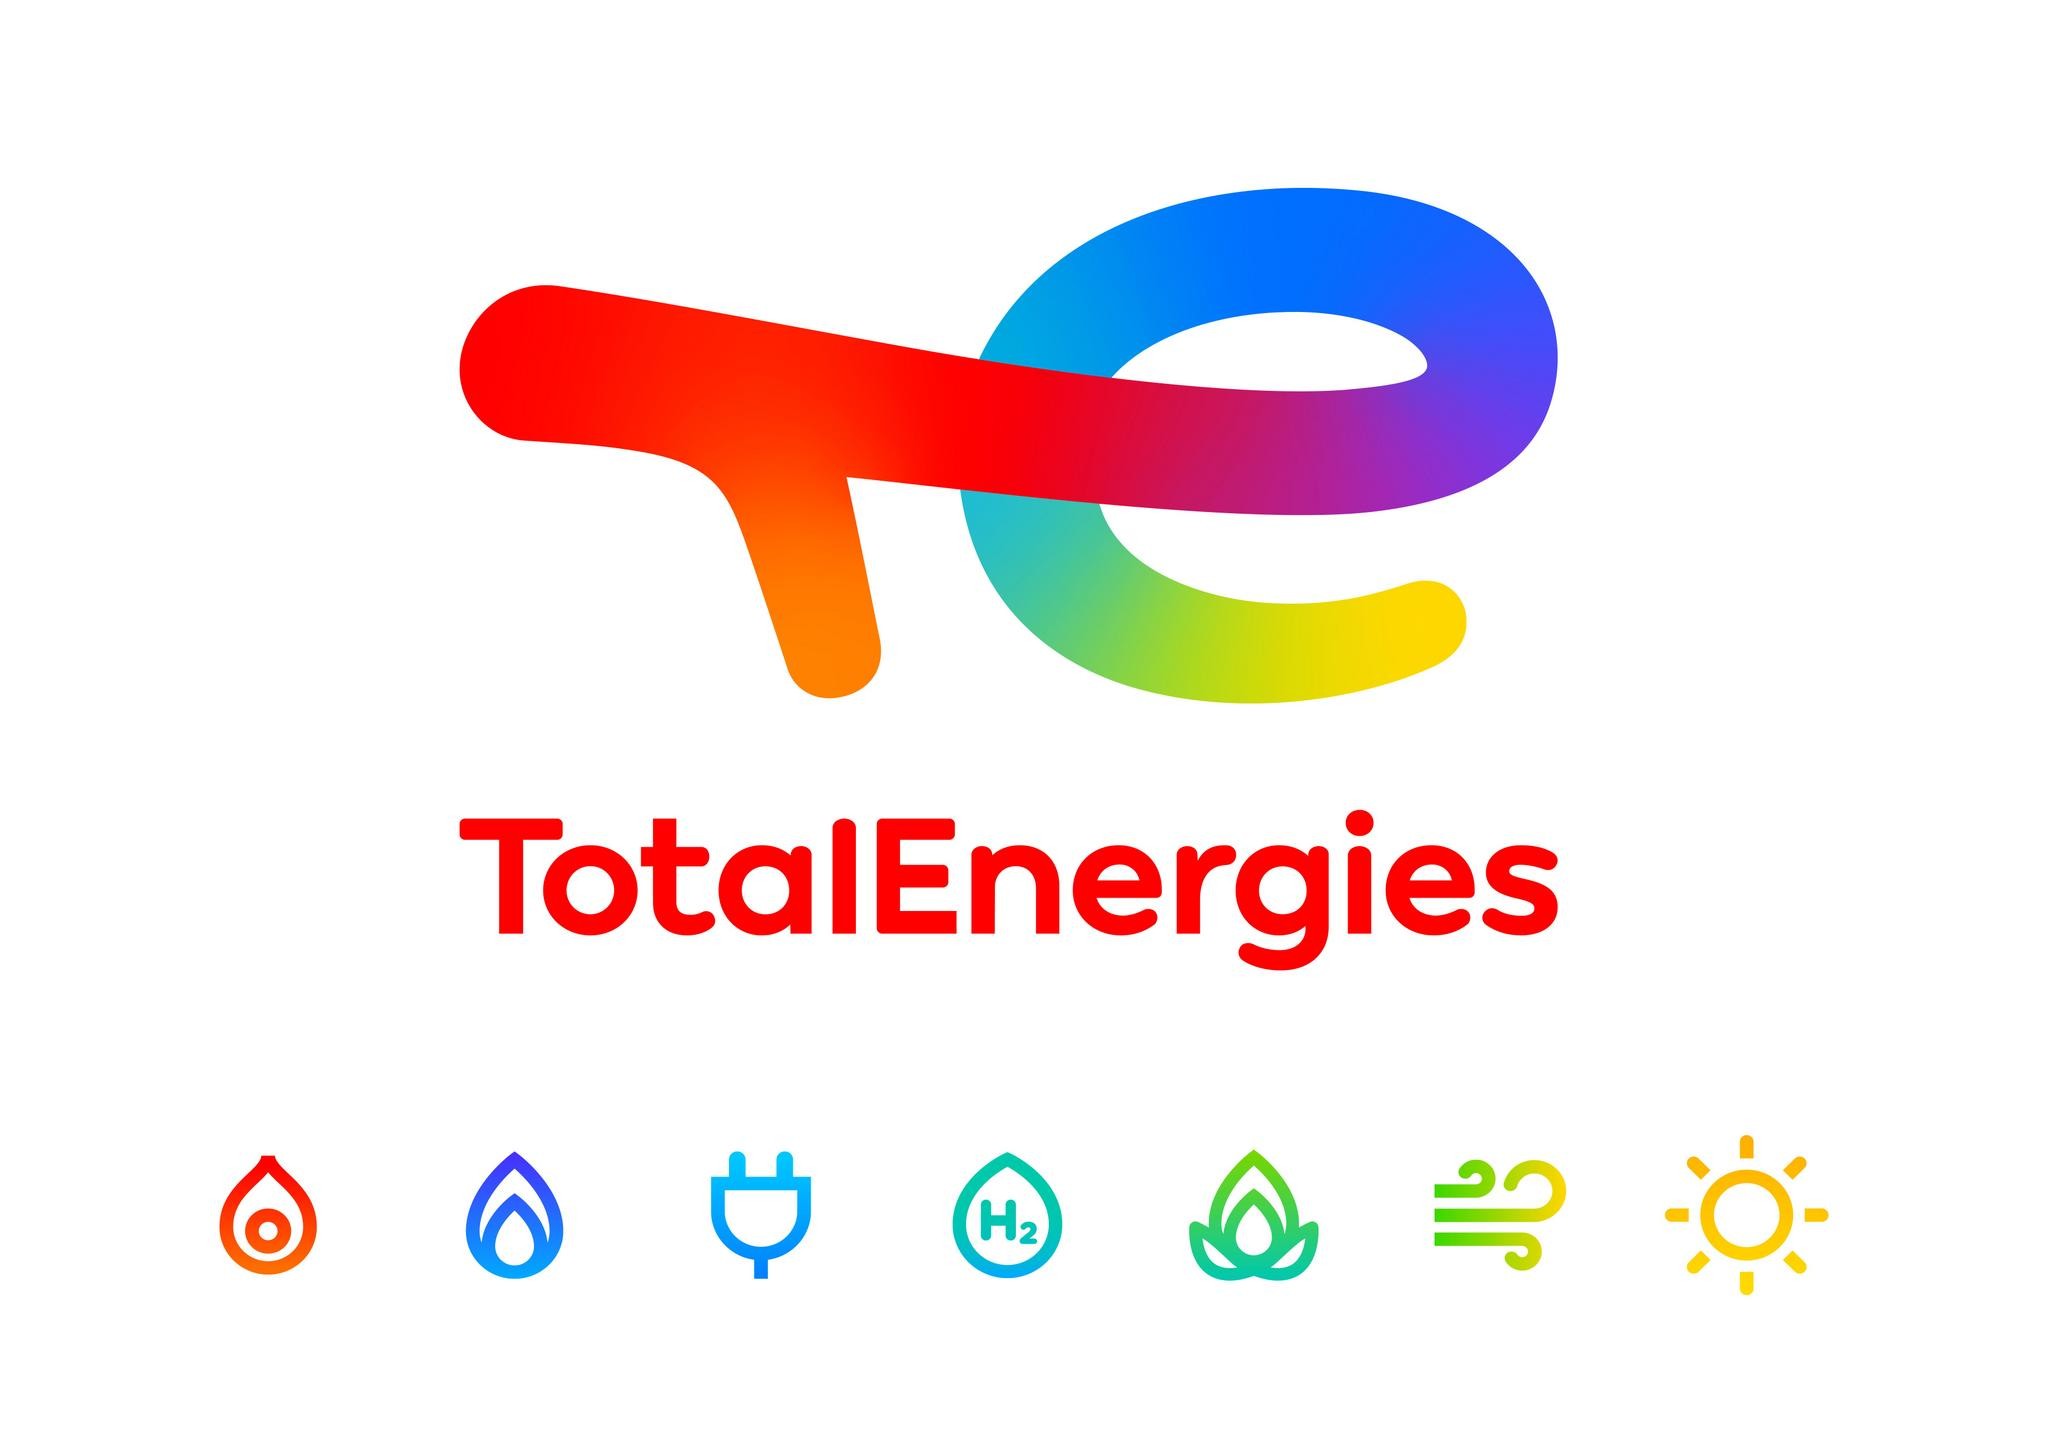 TOTAL BECOMES TOTALENERGIES